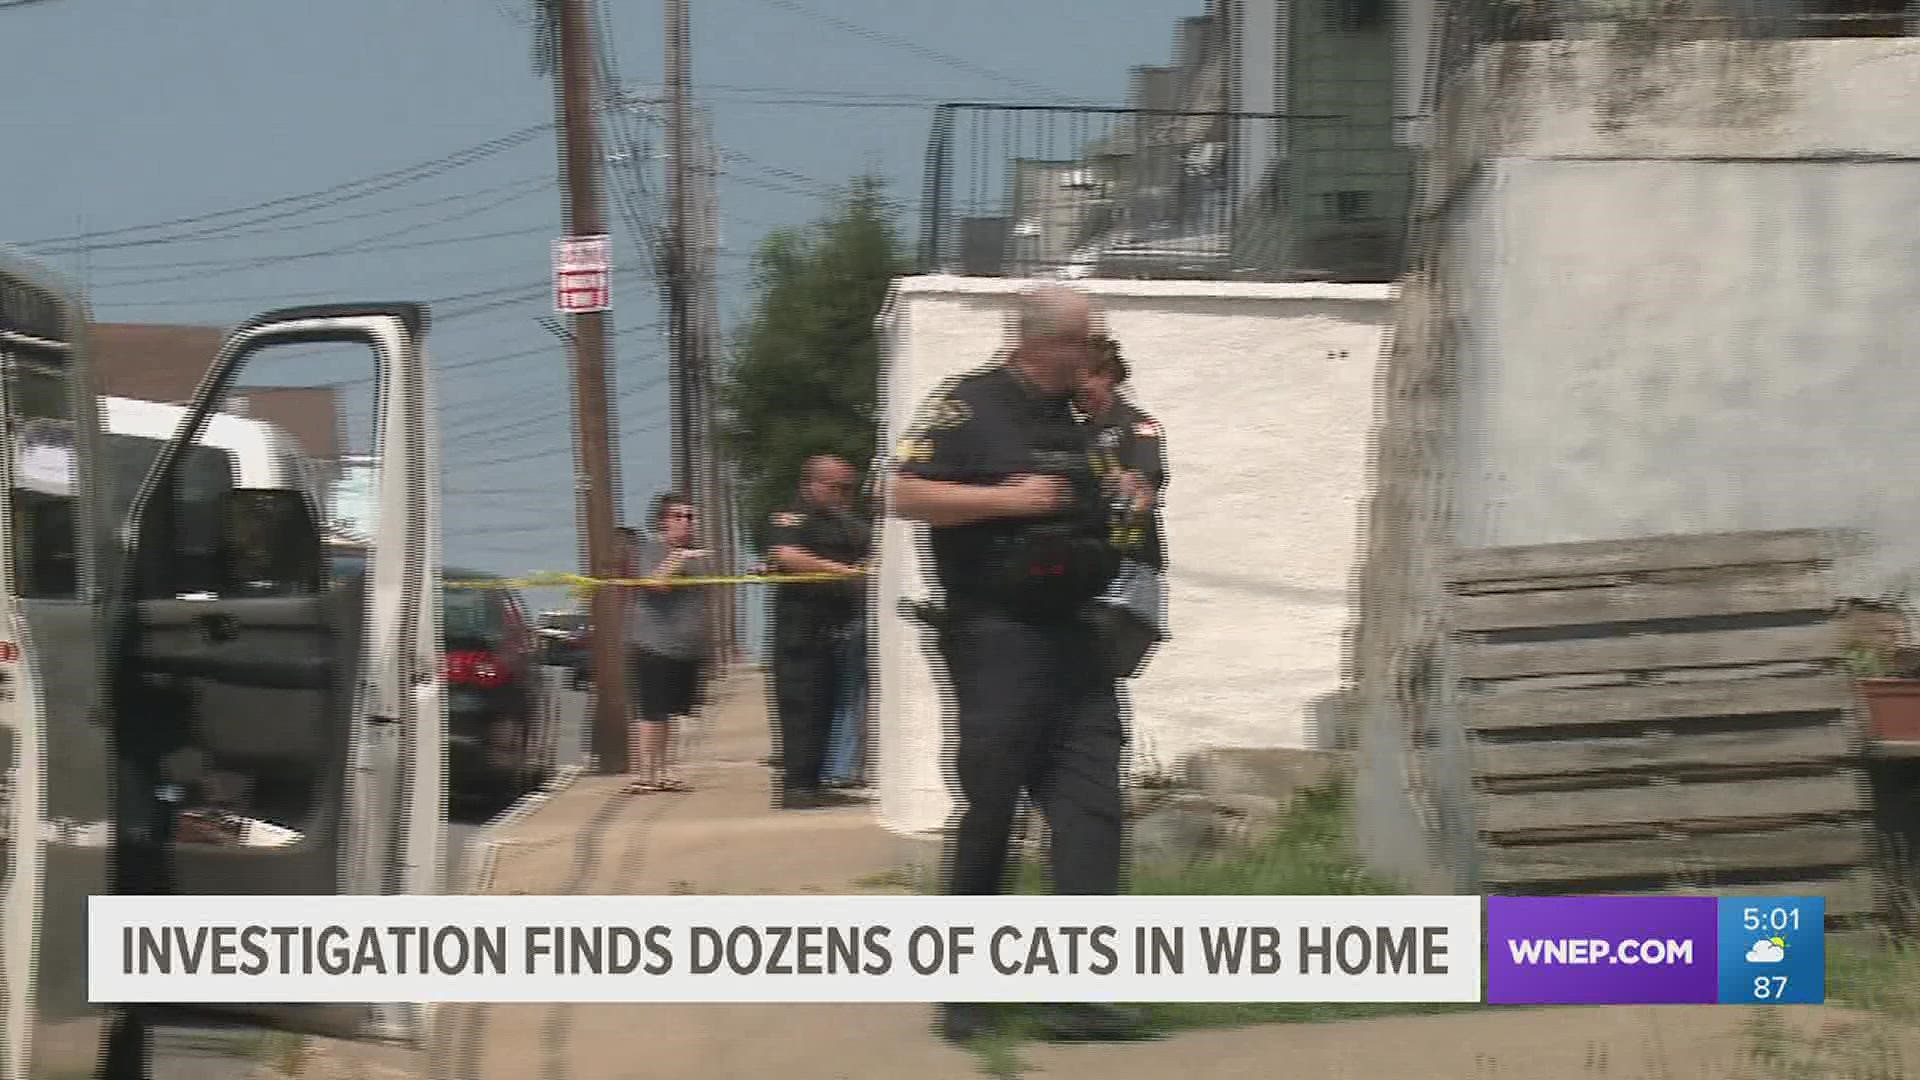 SPCA workers say they will remove between 20 and 30 cats from a house on Andover Street.